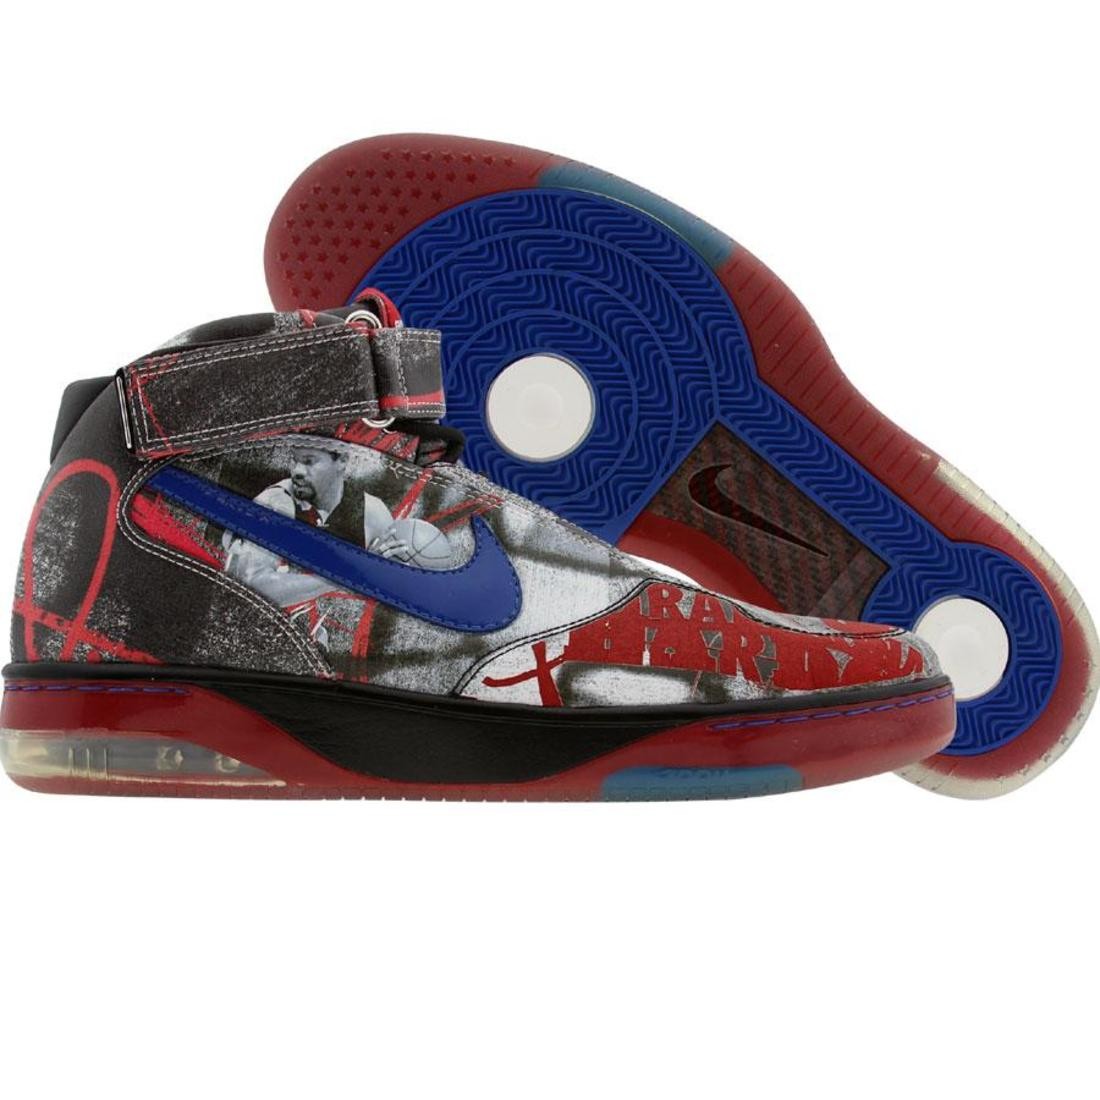 Nike Air Force 25 6 Pack 2007 NBA All Star Release - Rasheed Wallace Edition (white / varsity royal / varsity red)